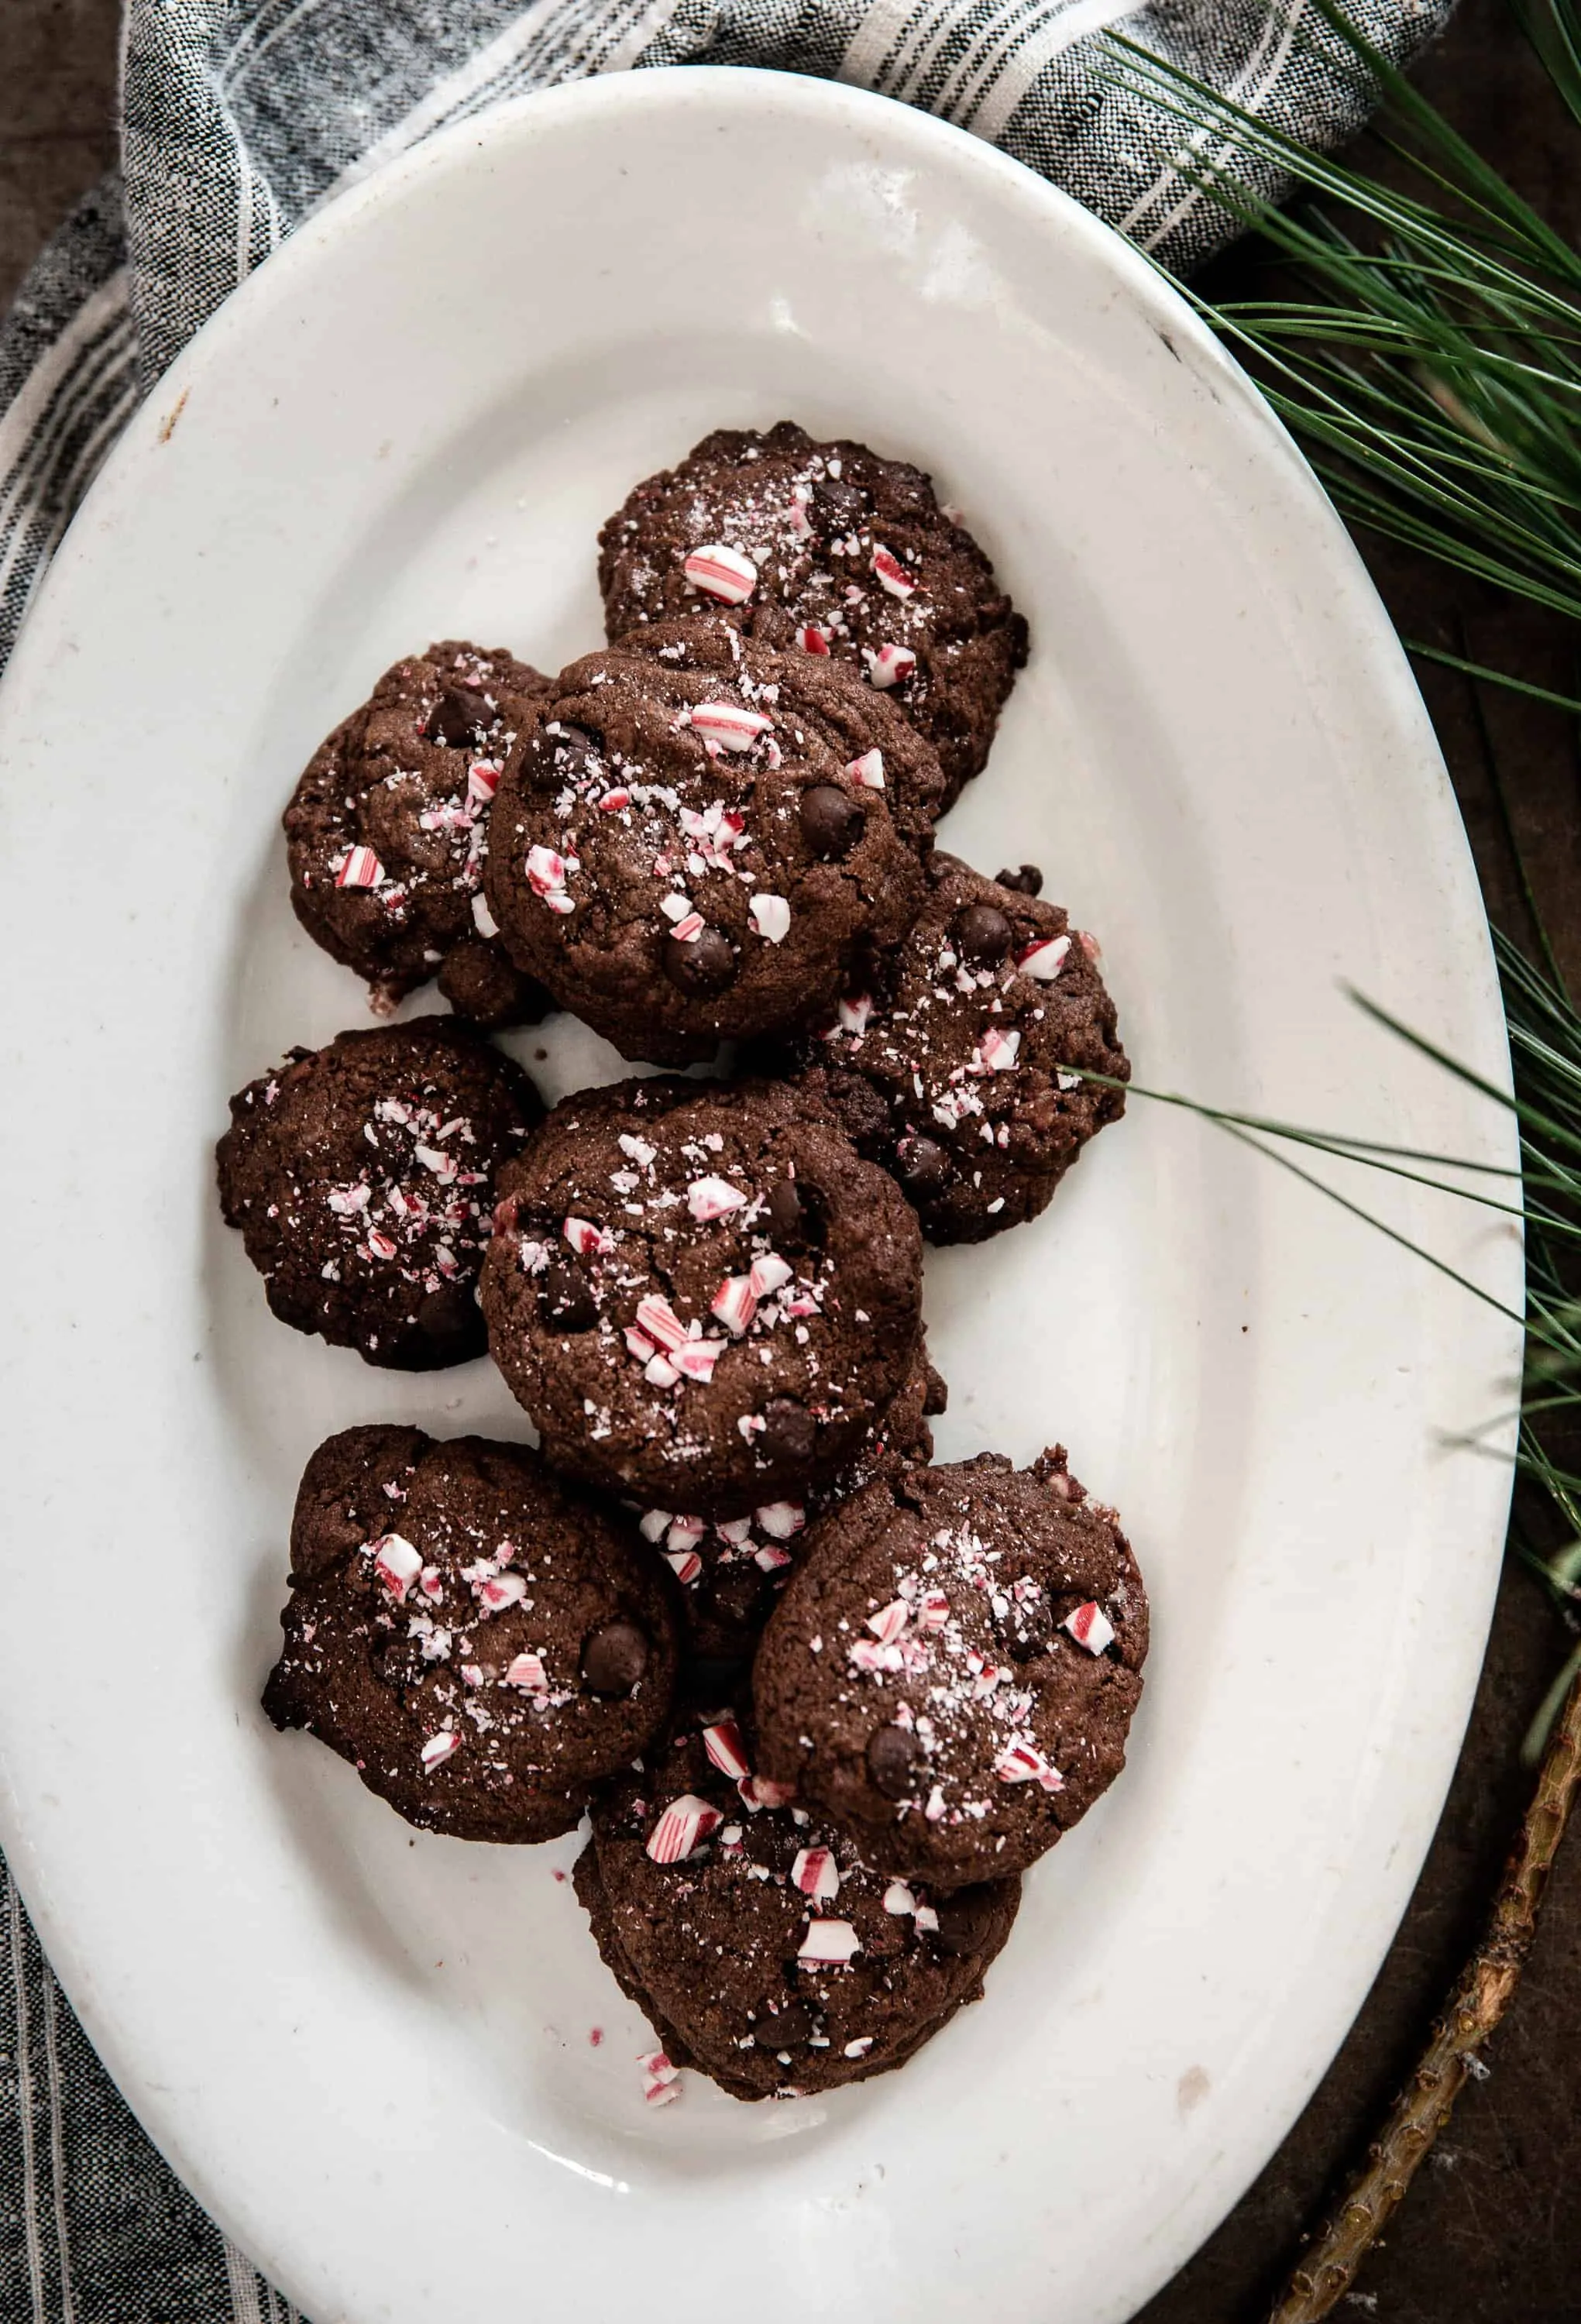 Chewy and delicious chocolate peppermint cookies are packed with cocoa powder, chocolate chips, peppermint extract, and crushed candy cane! There’s a burst of Christmas flavor in every bite!